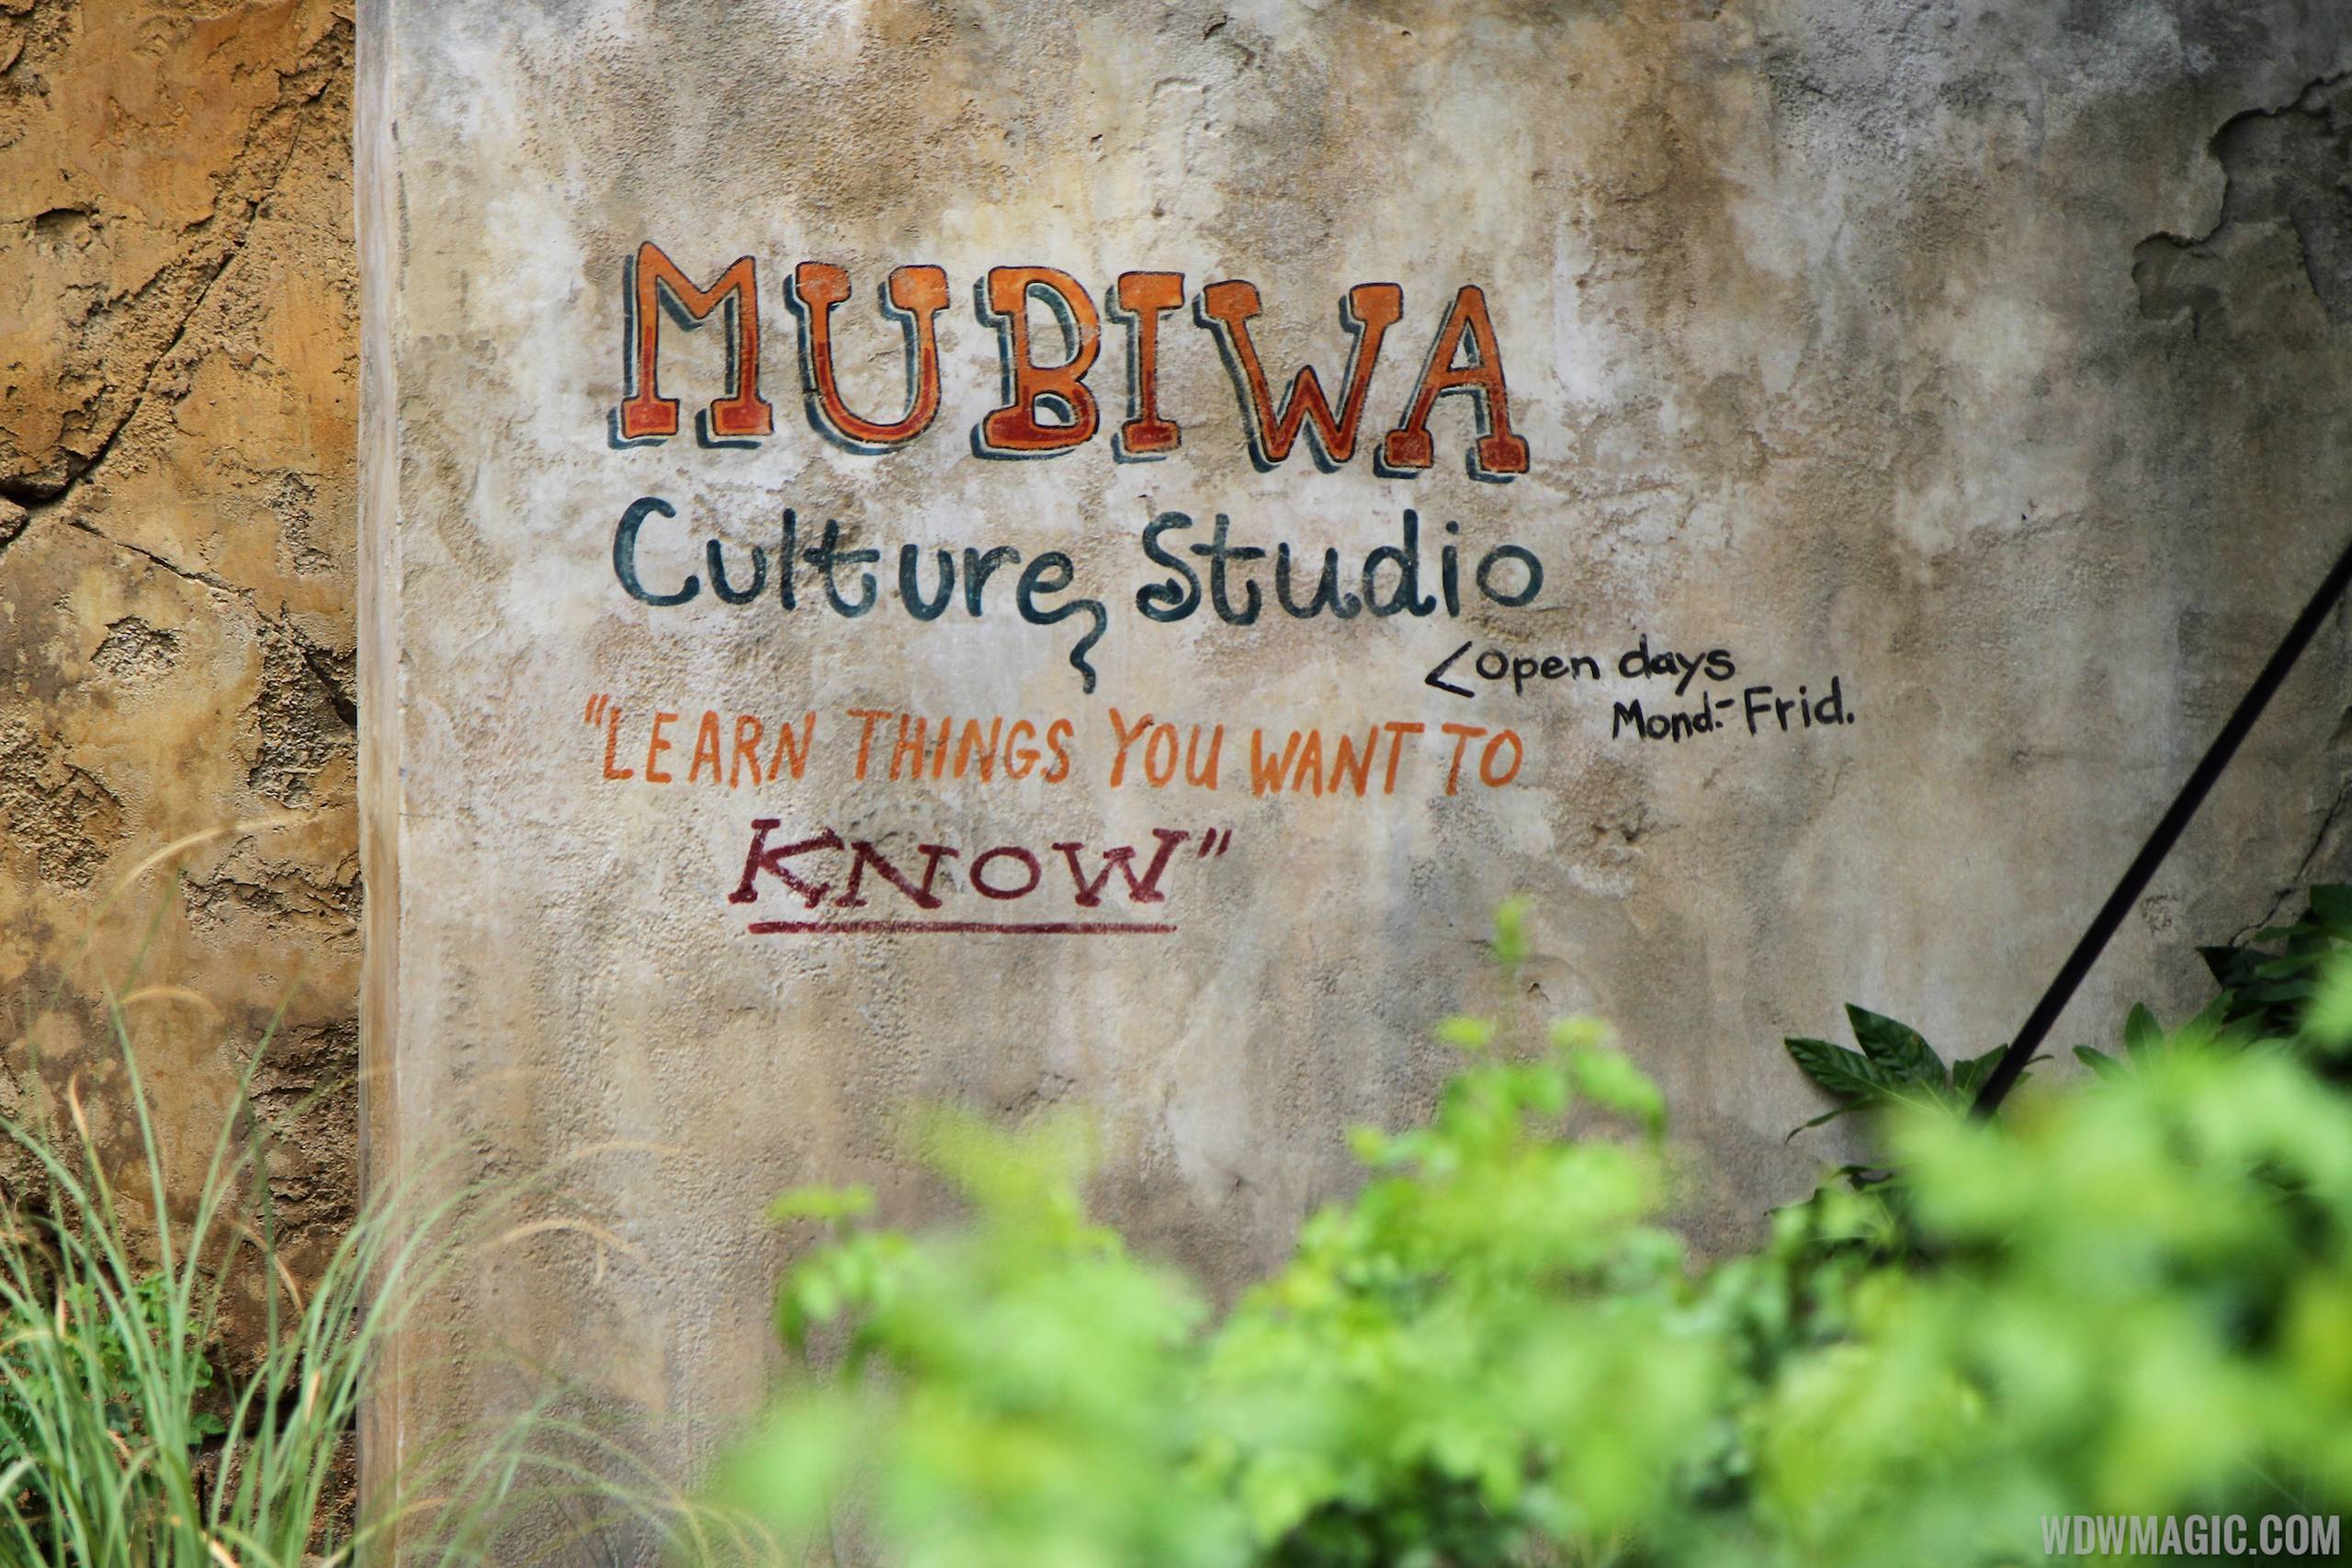 New Harambe Theatre area in Africa - Wall art